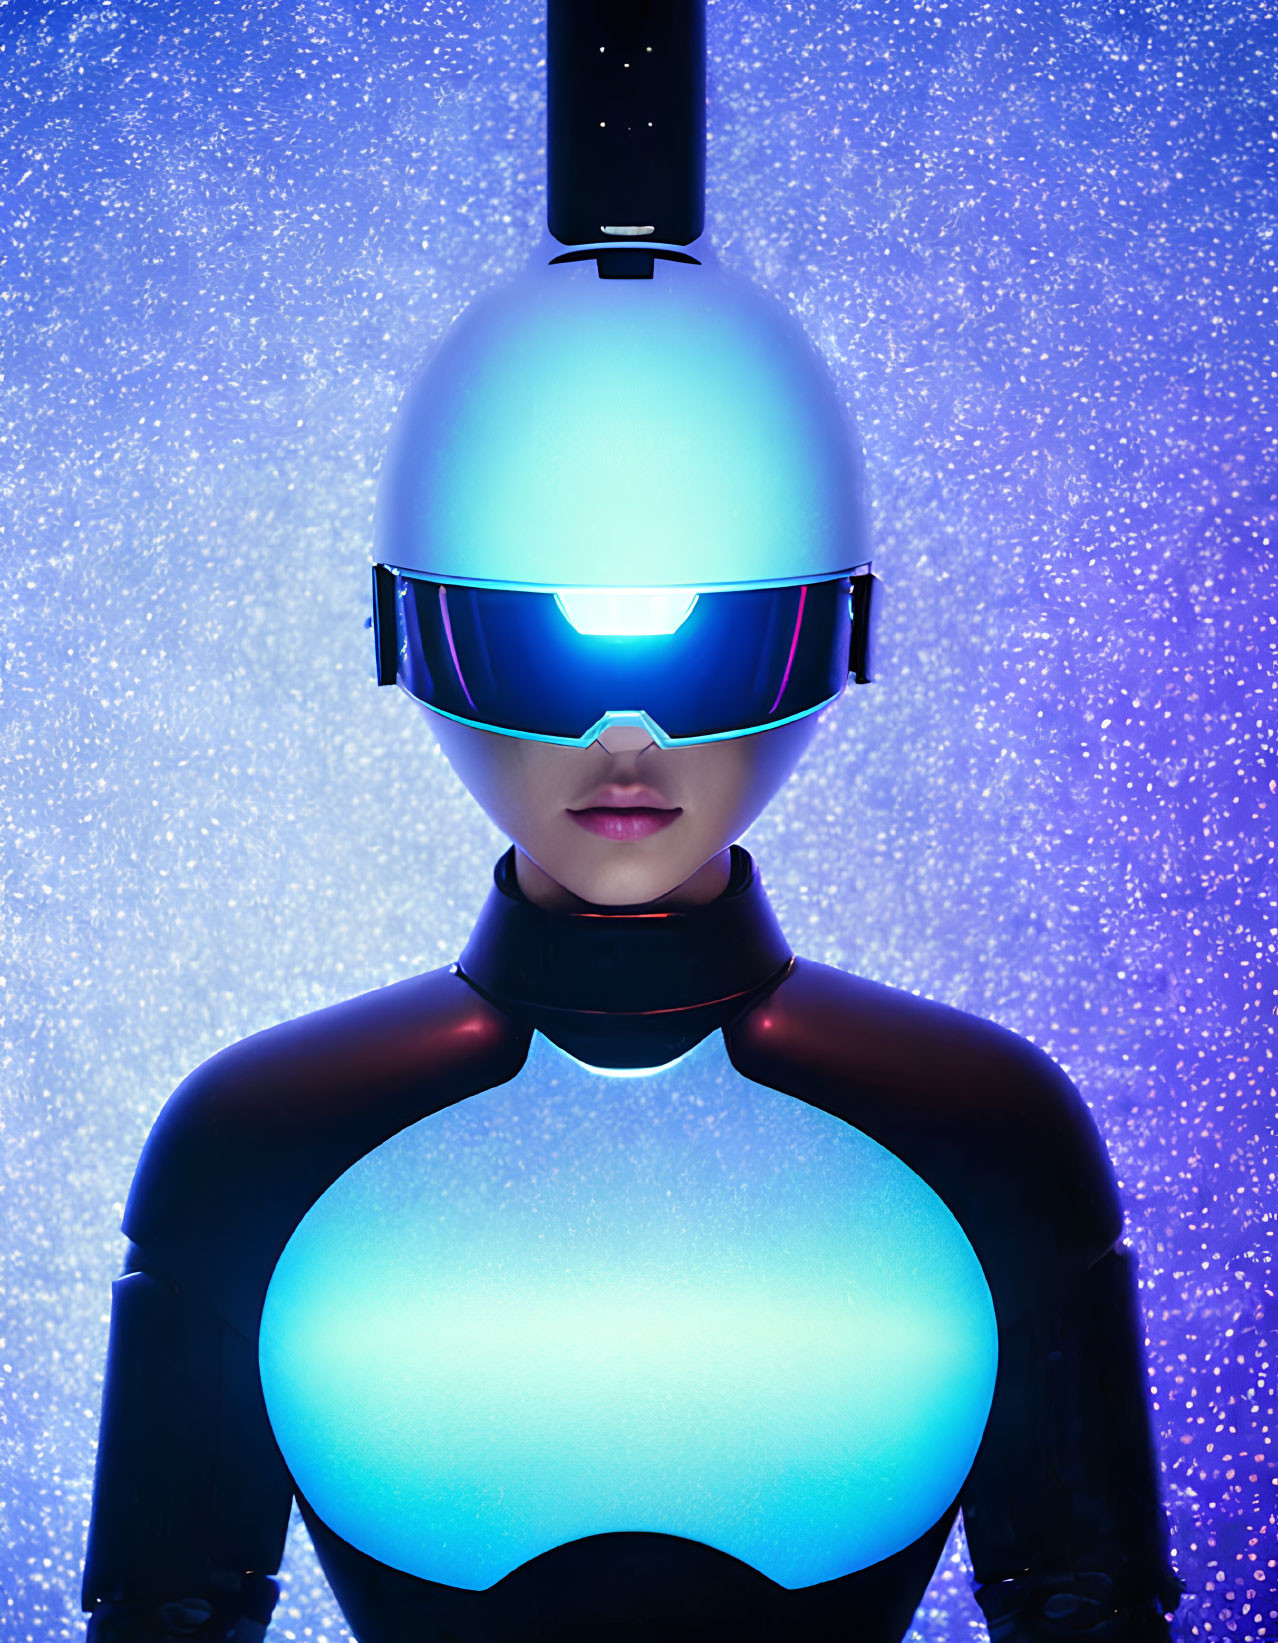 Futuristic person with glowing helmet in starry background